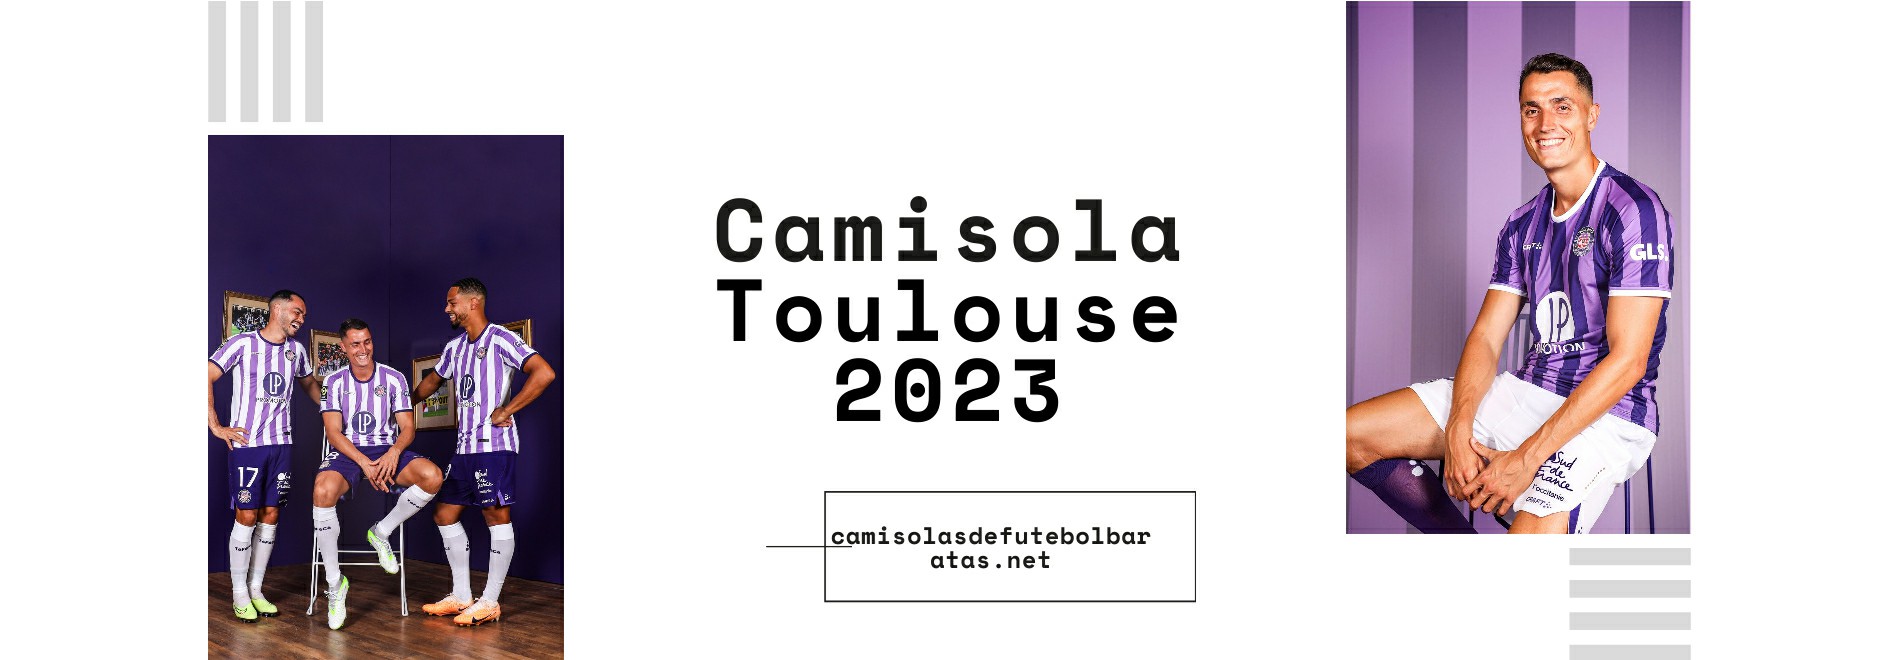 Camisola Toulouse 2023-2024